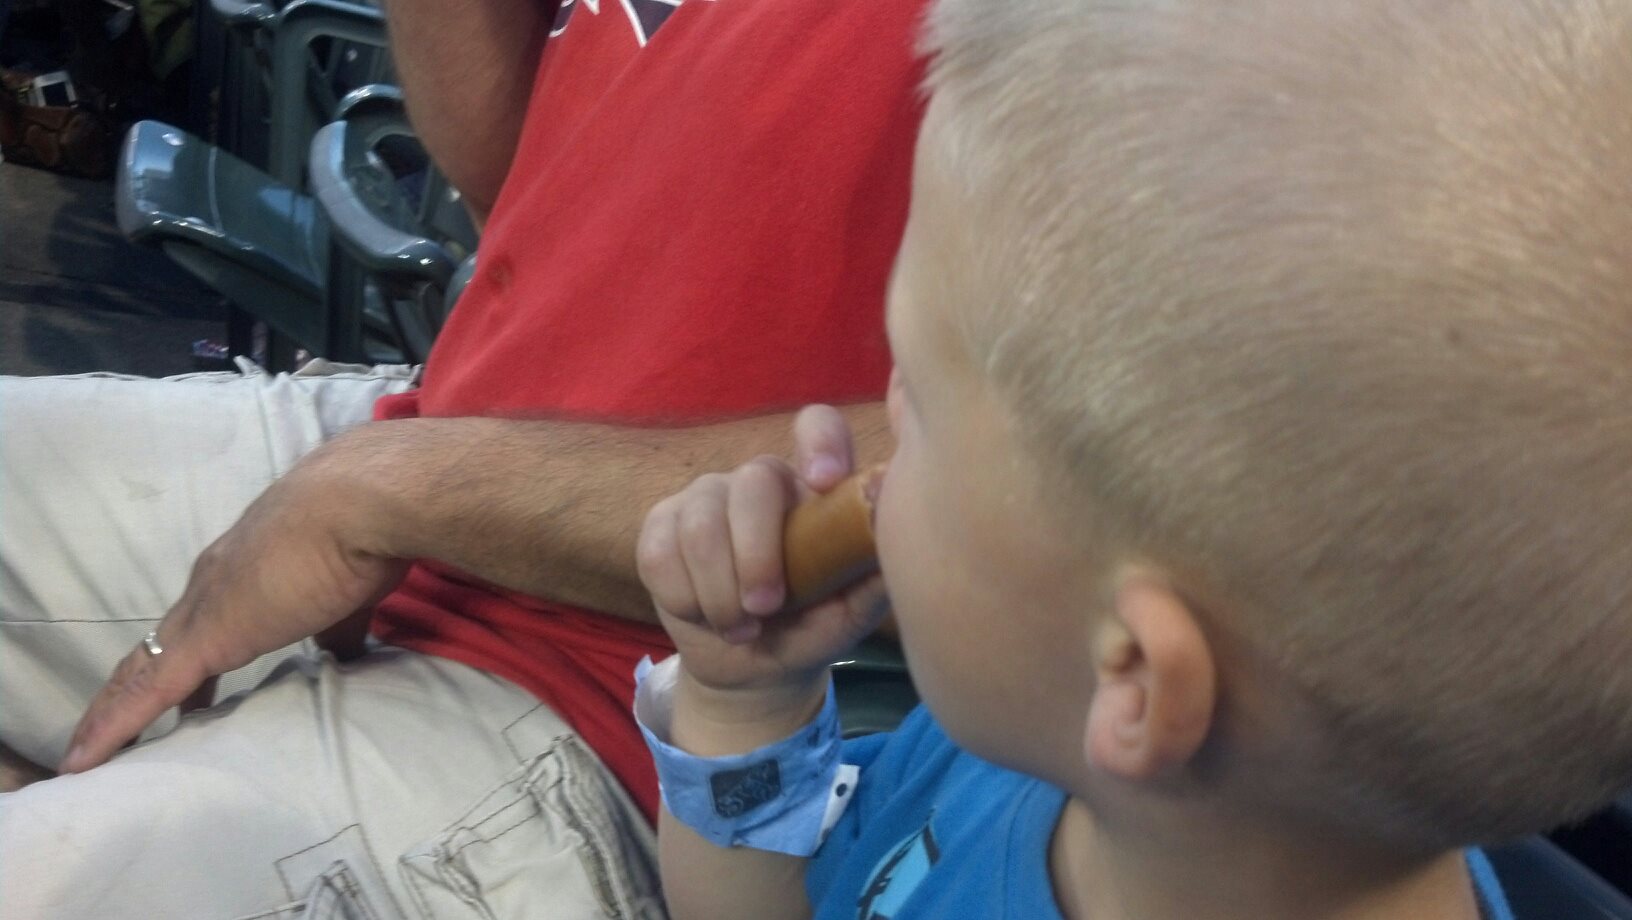 He loved the the hot dogs at the game.